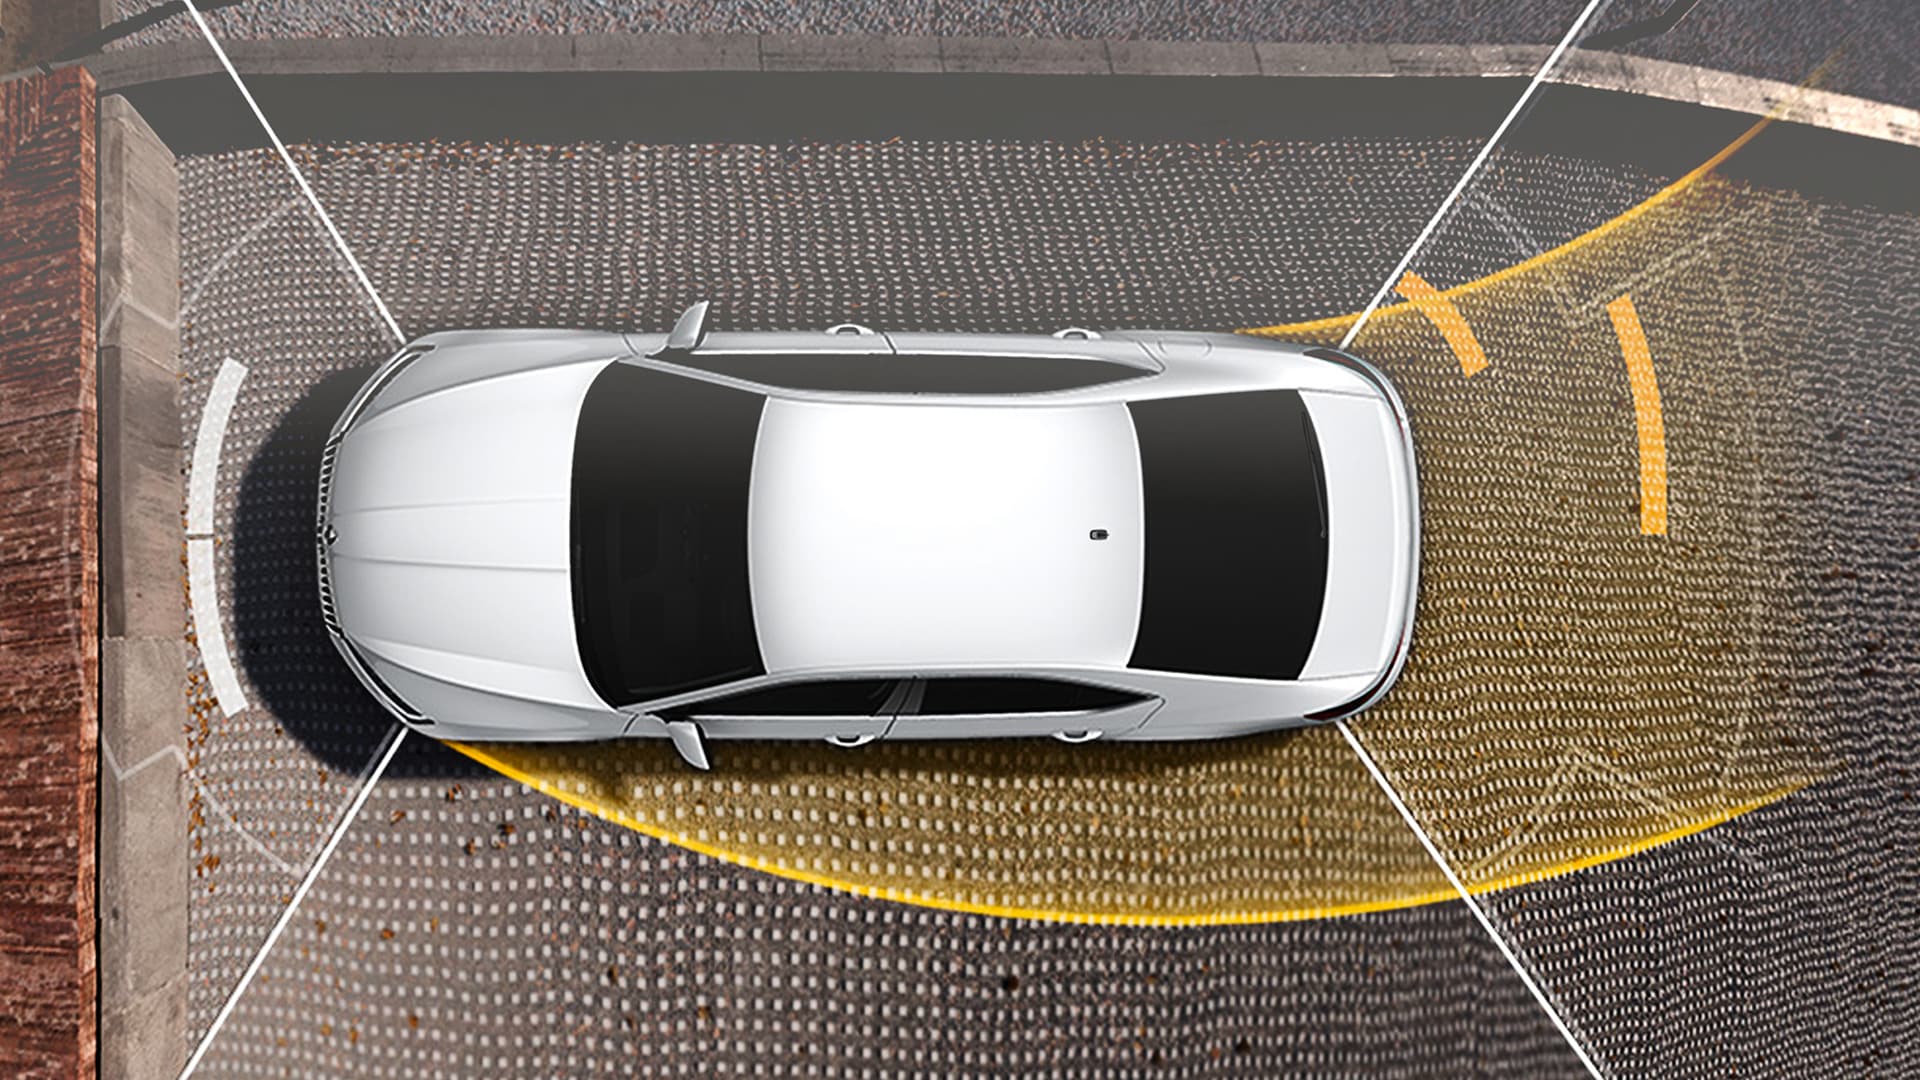 The Park Assist and 360-degree camera helps the Skoda Superb to automatically identify suitable parking space between parallel or vertical vehicles. 